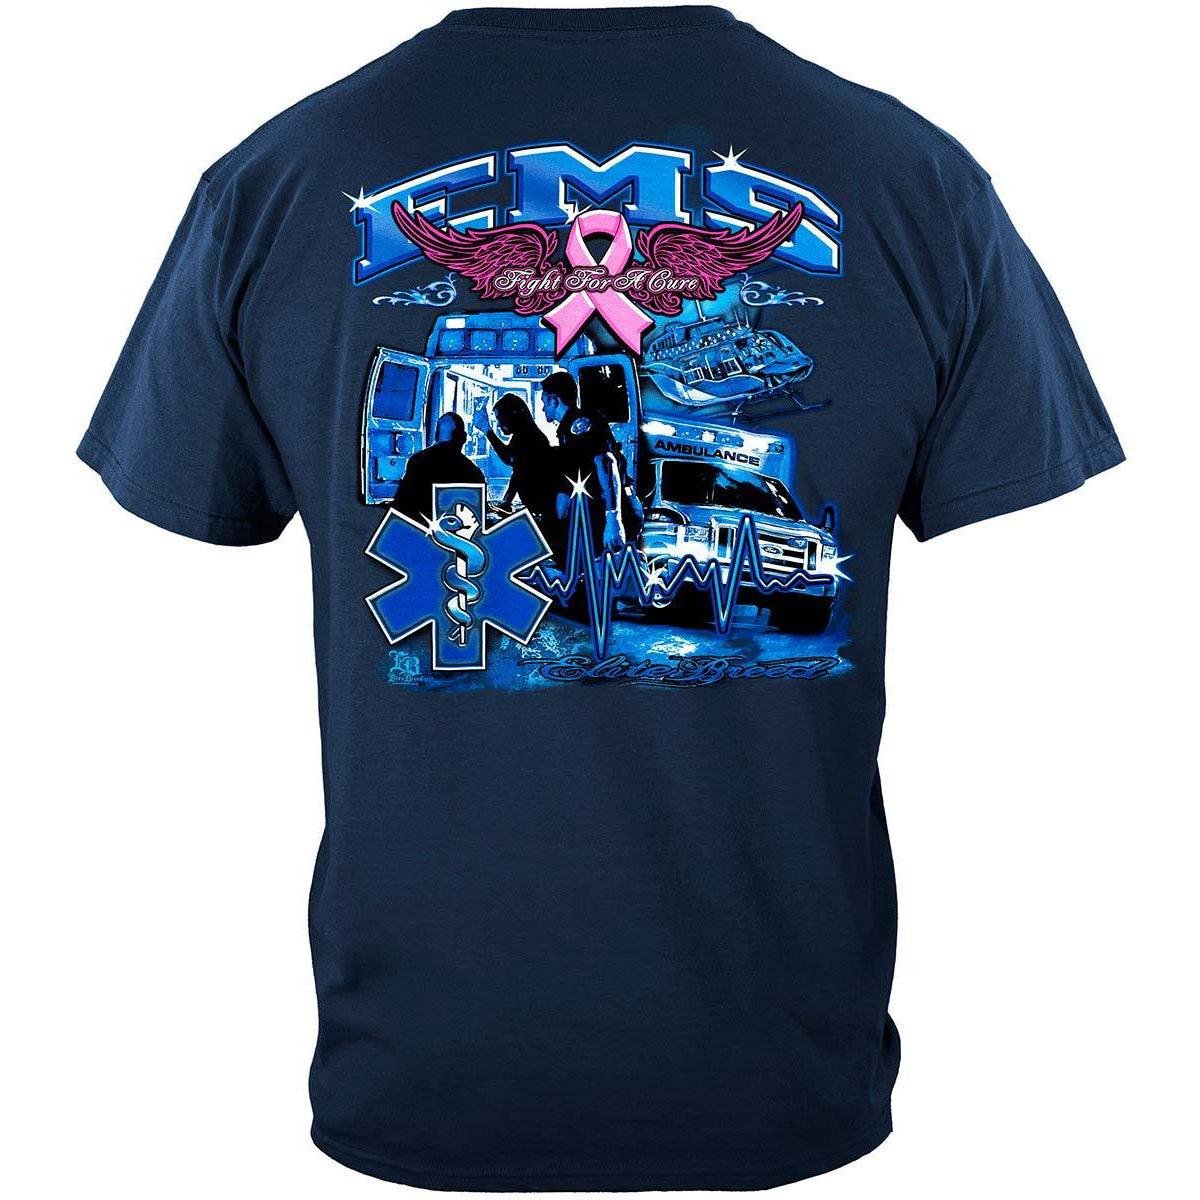 EMS Race for a Cure Cancer Awareness Long Sleeve - Military Republic